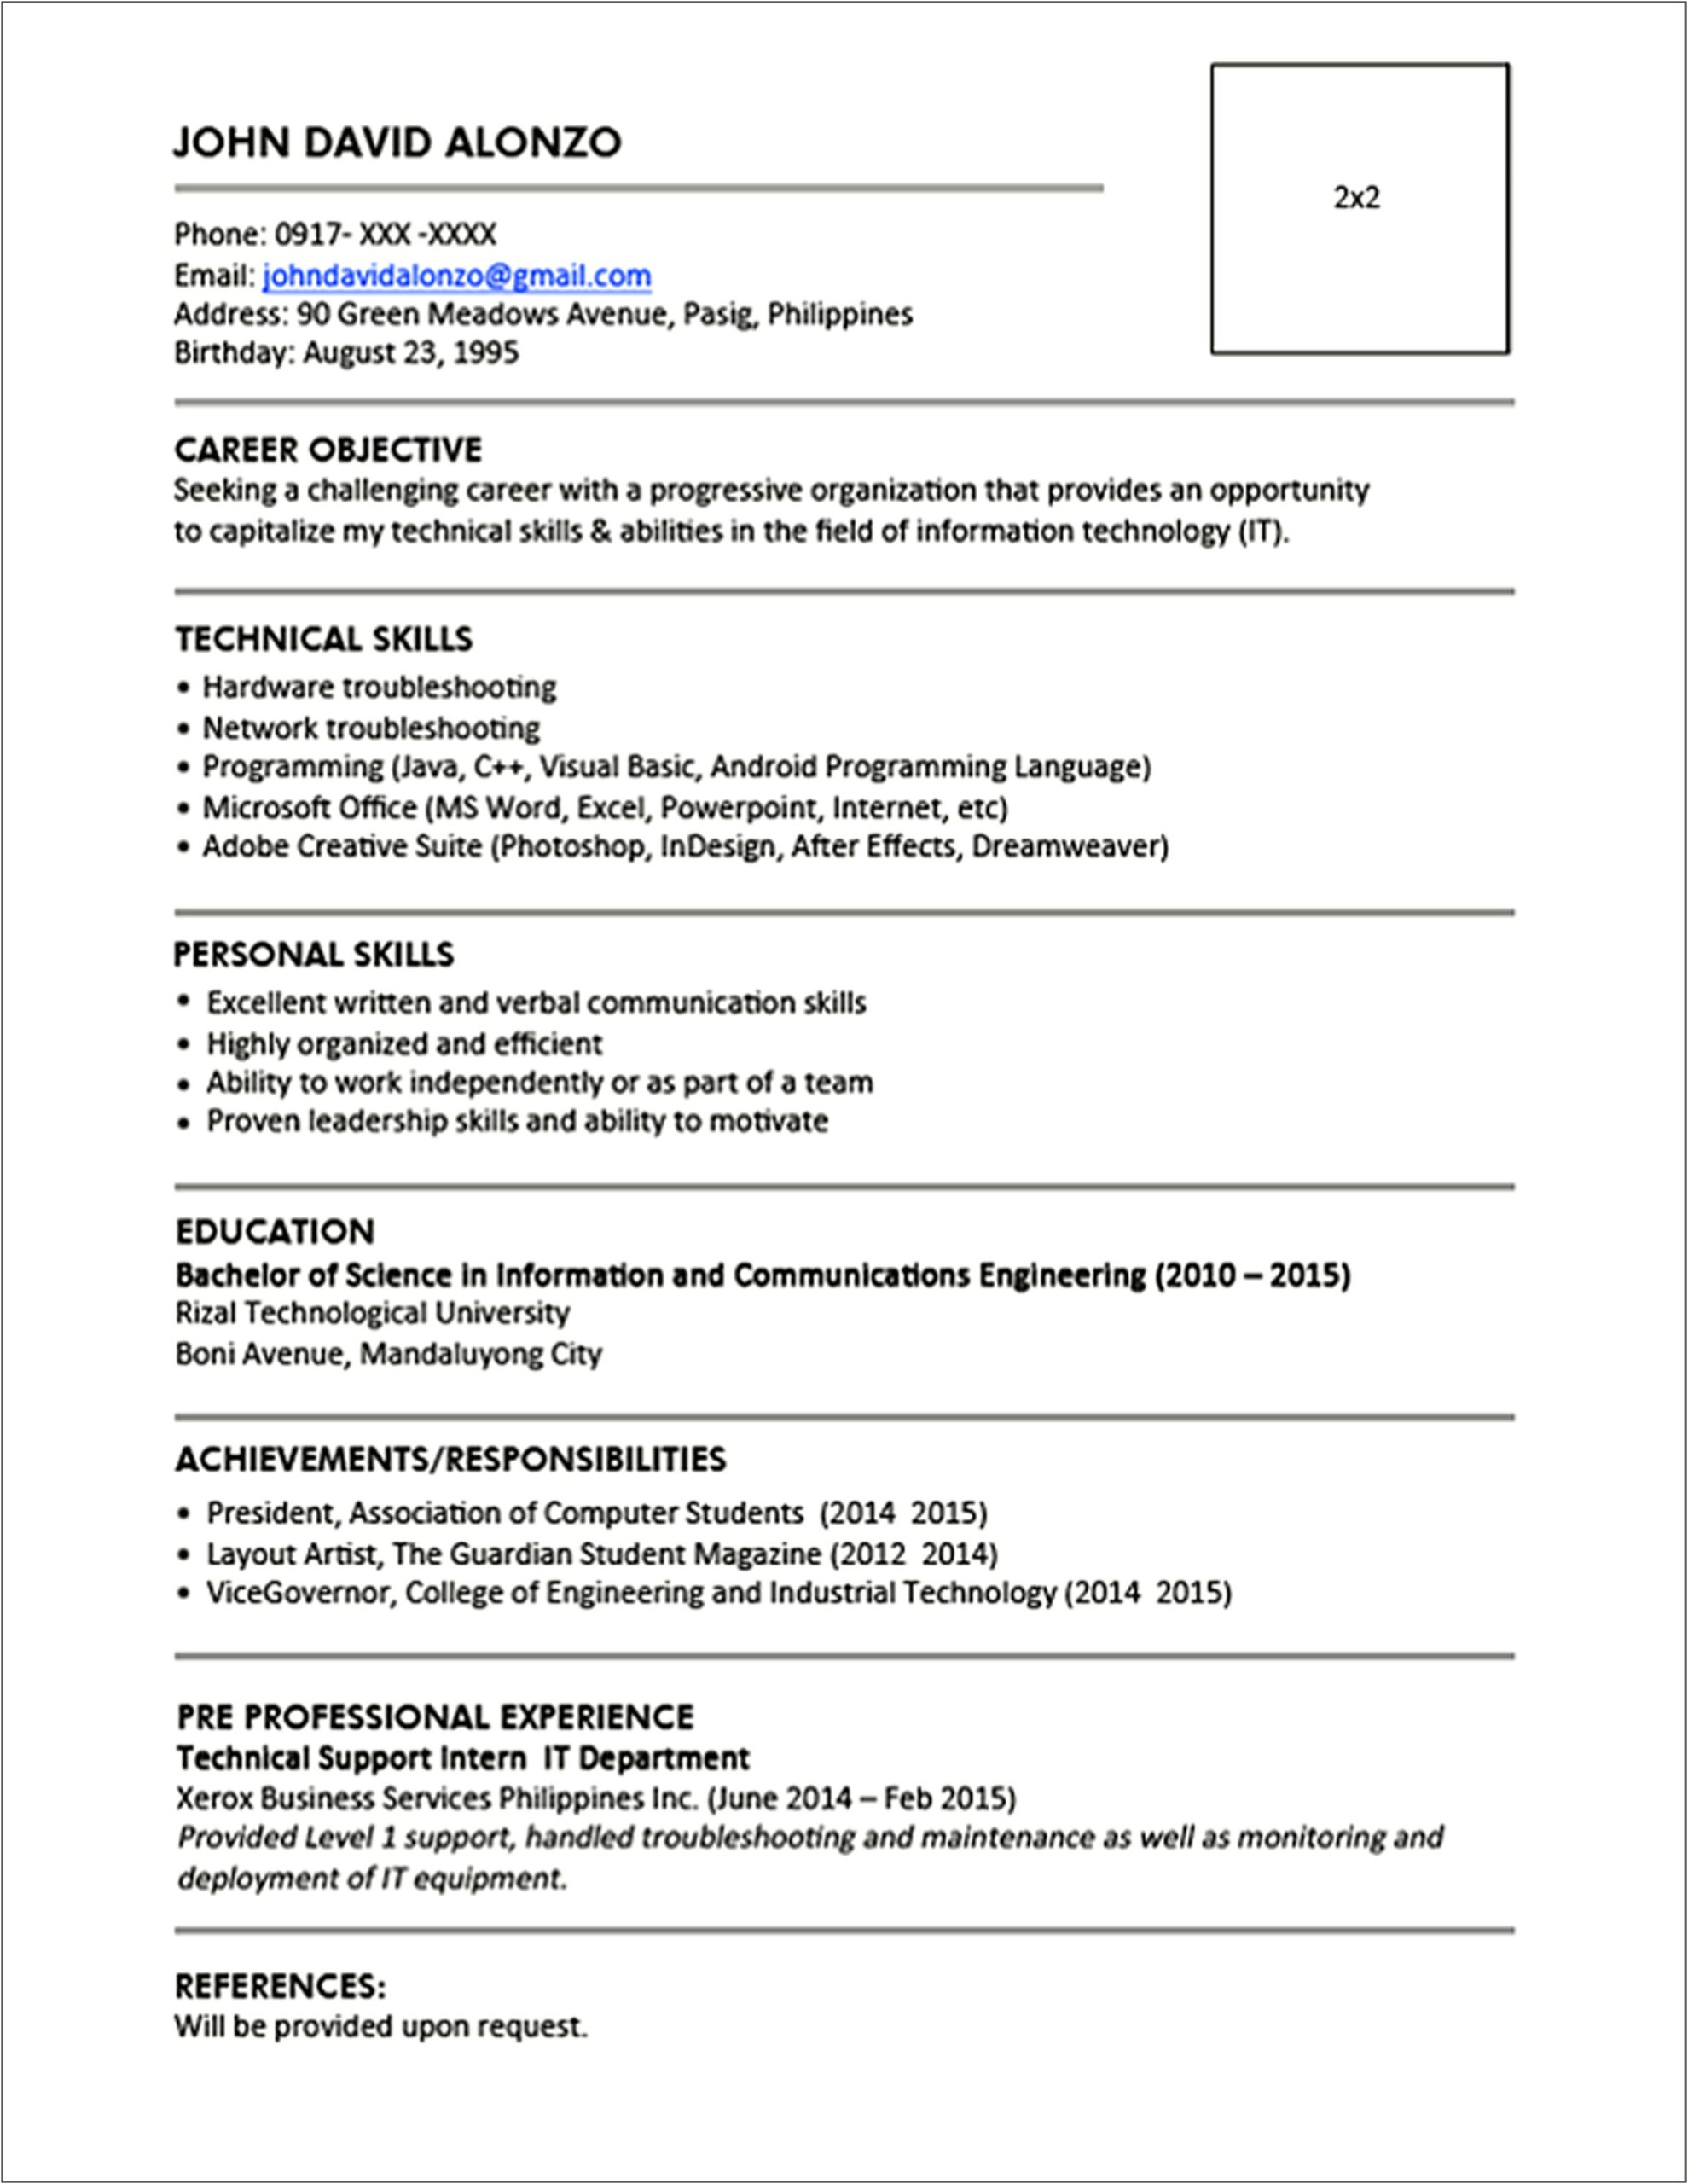 Experience Section Of Resume Examples